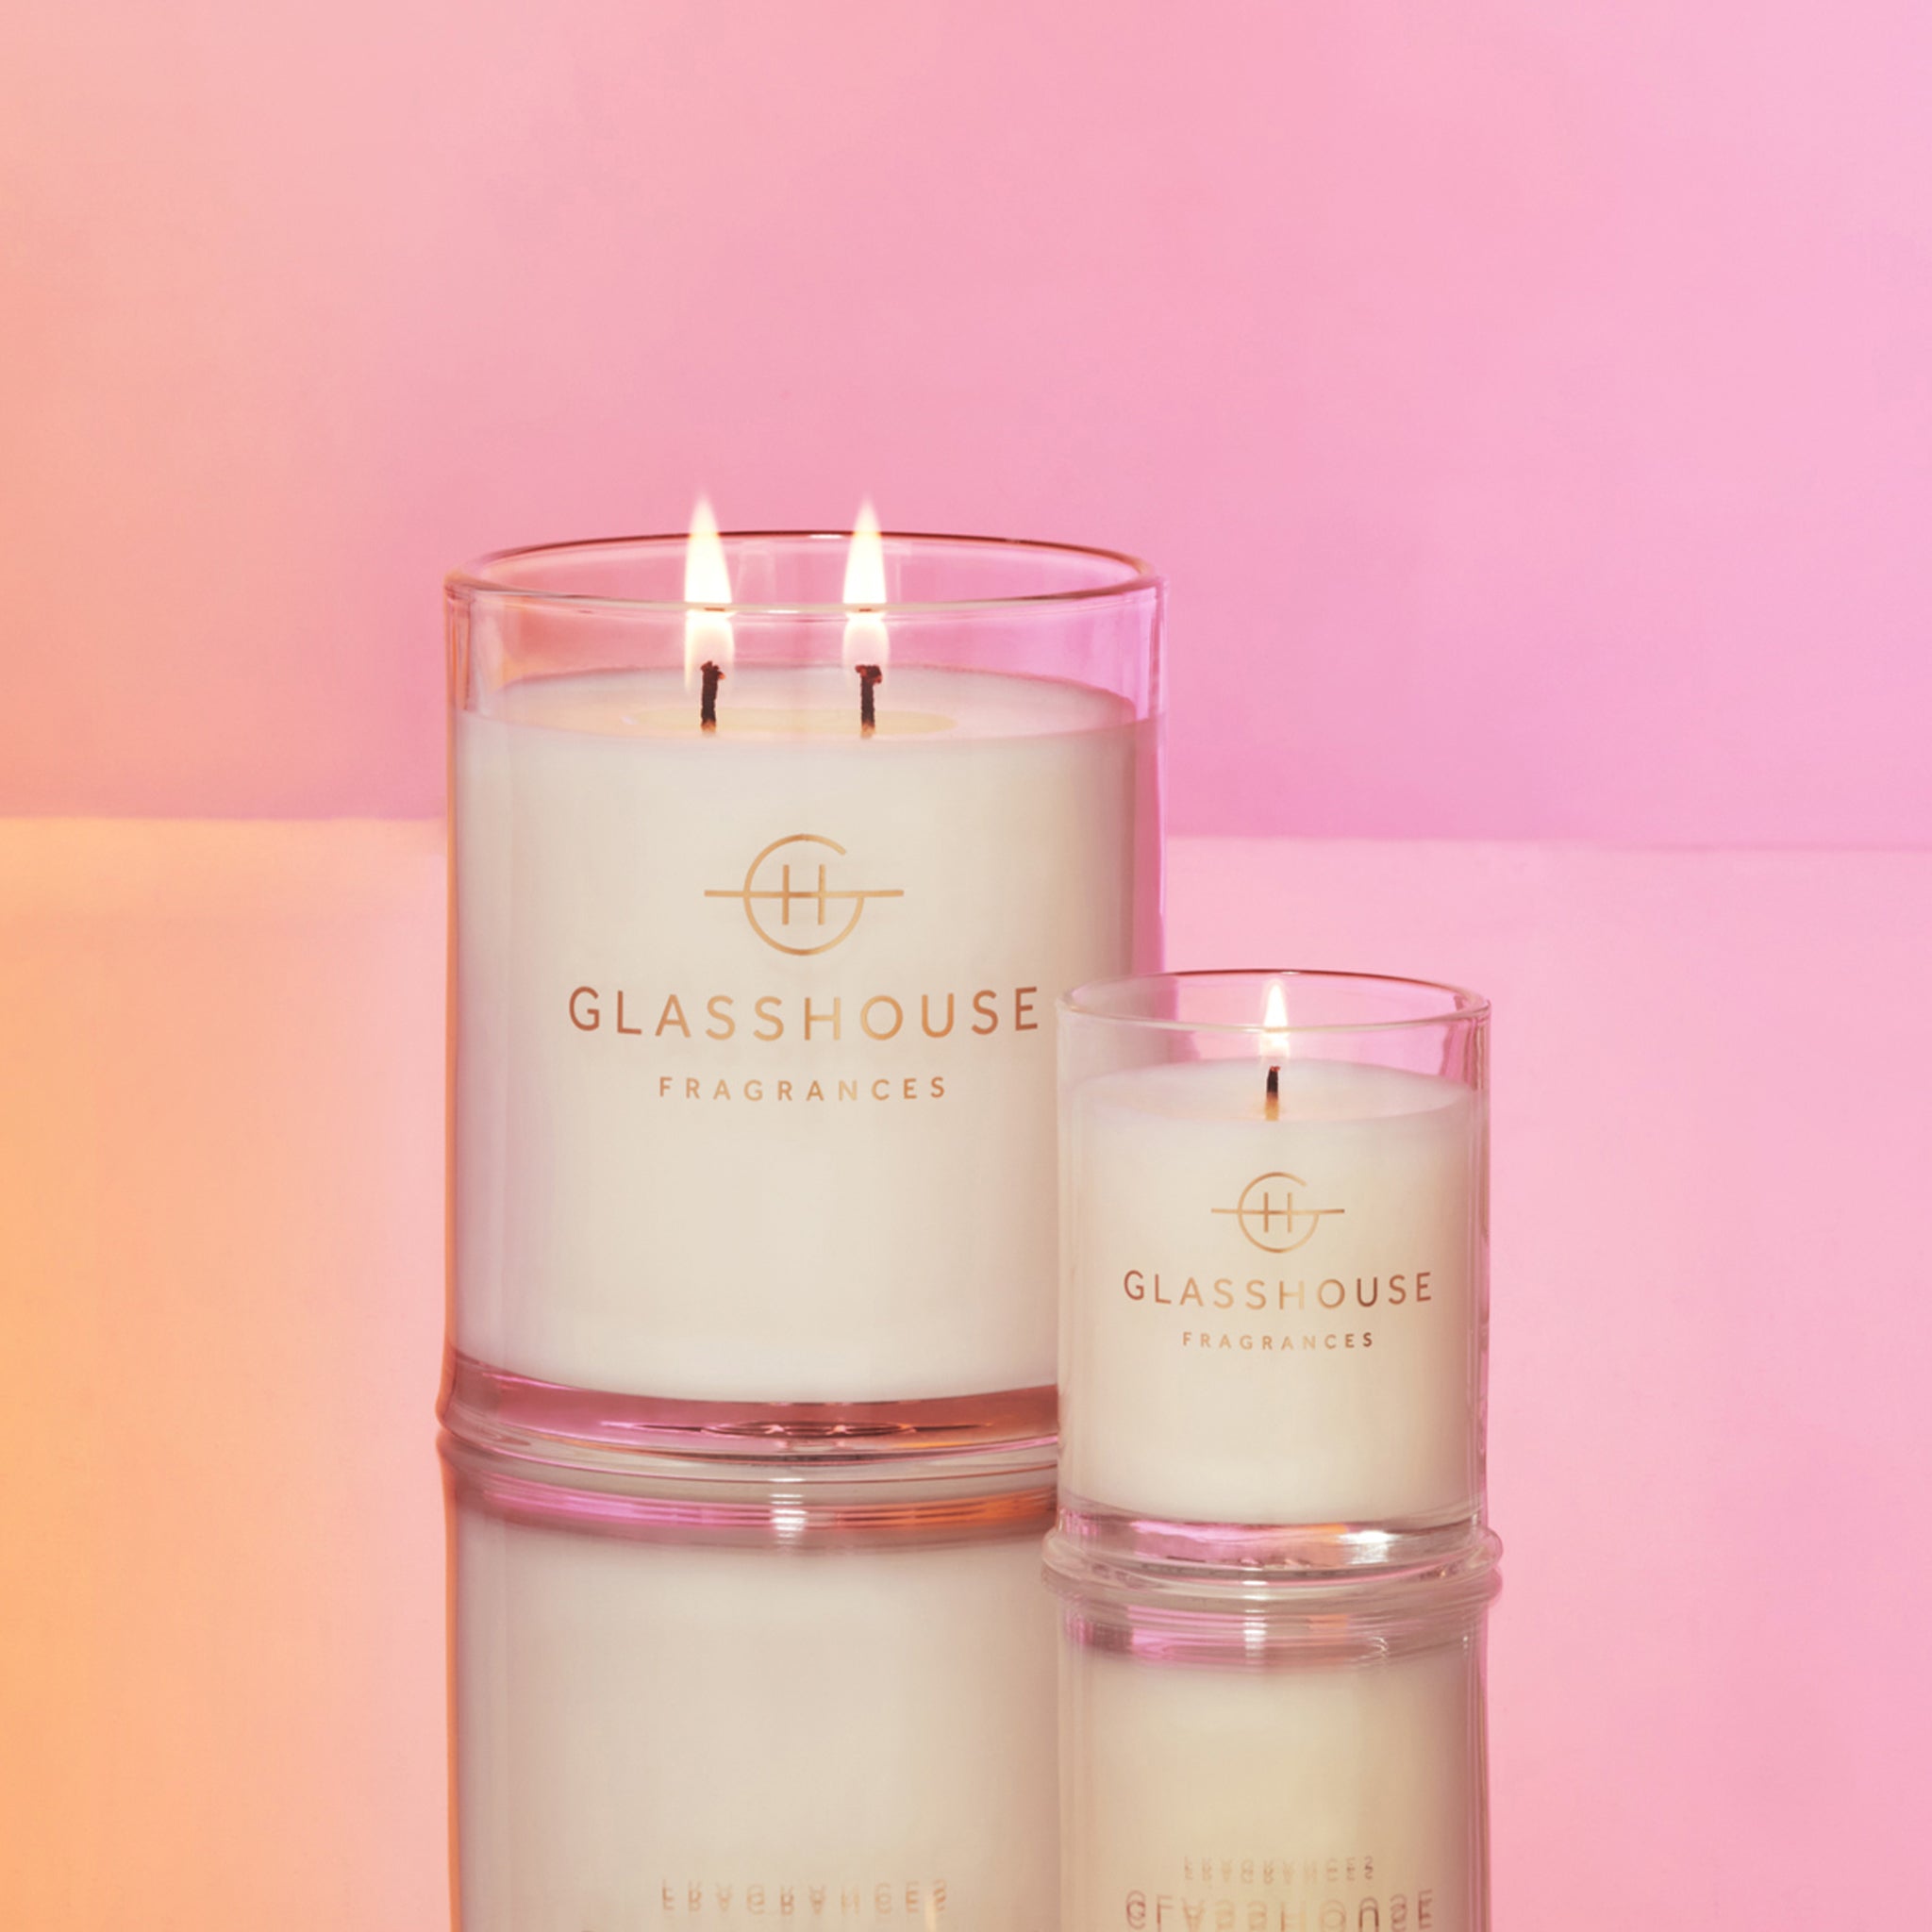 Glasshouse Fragrances 60g Soy Candle - SUNSETS IN CAPRI - White Peach & Sea Breeze